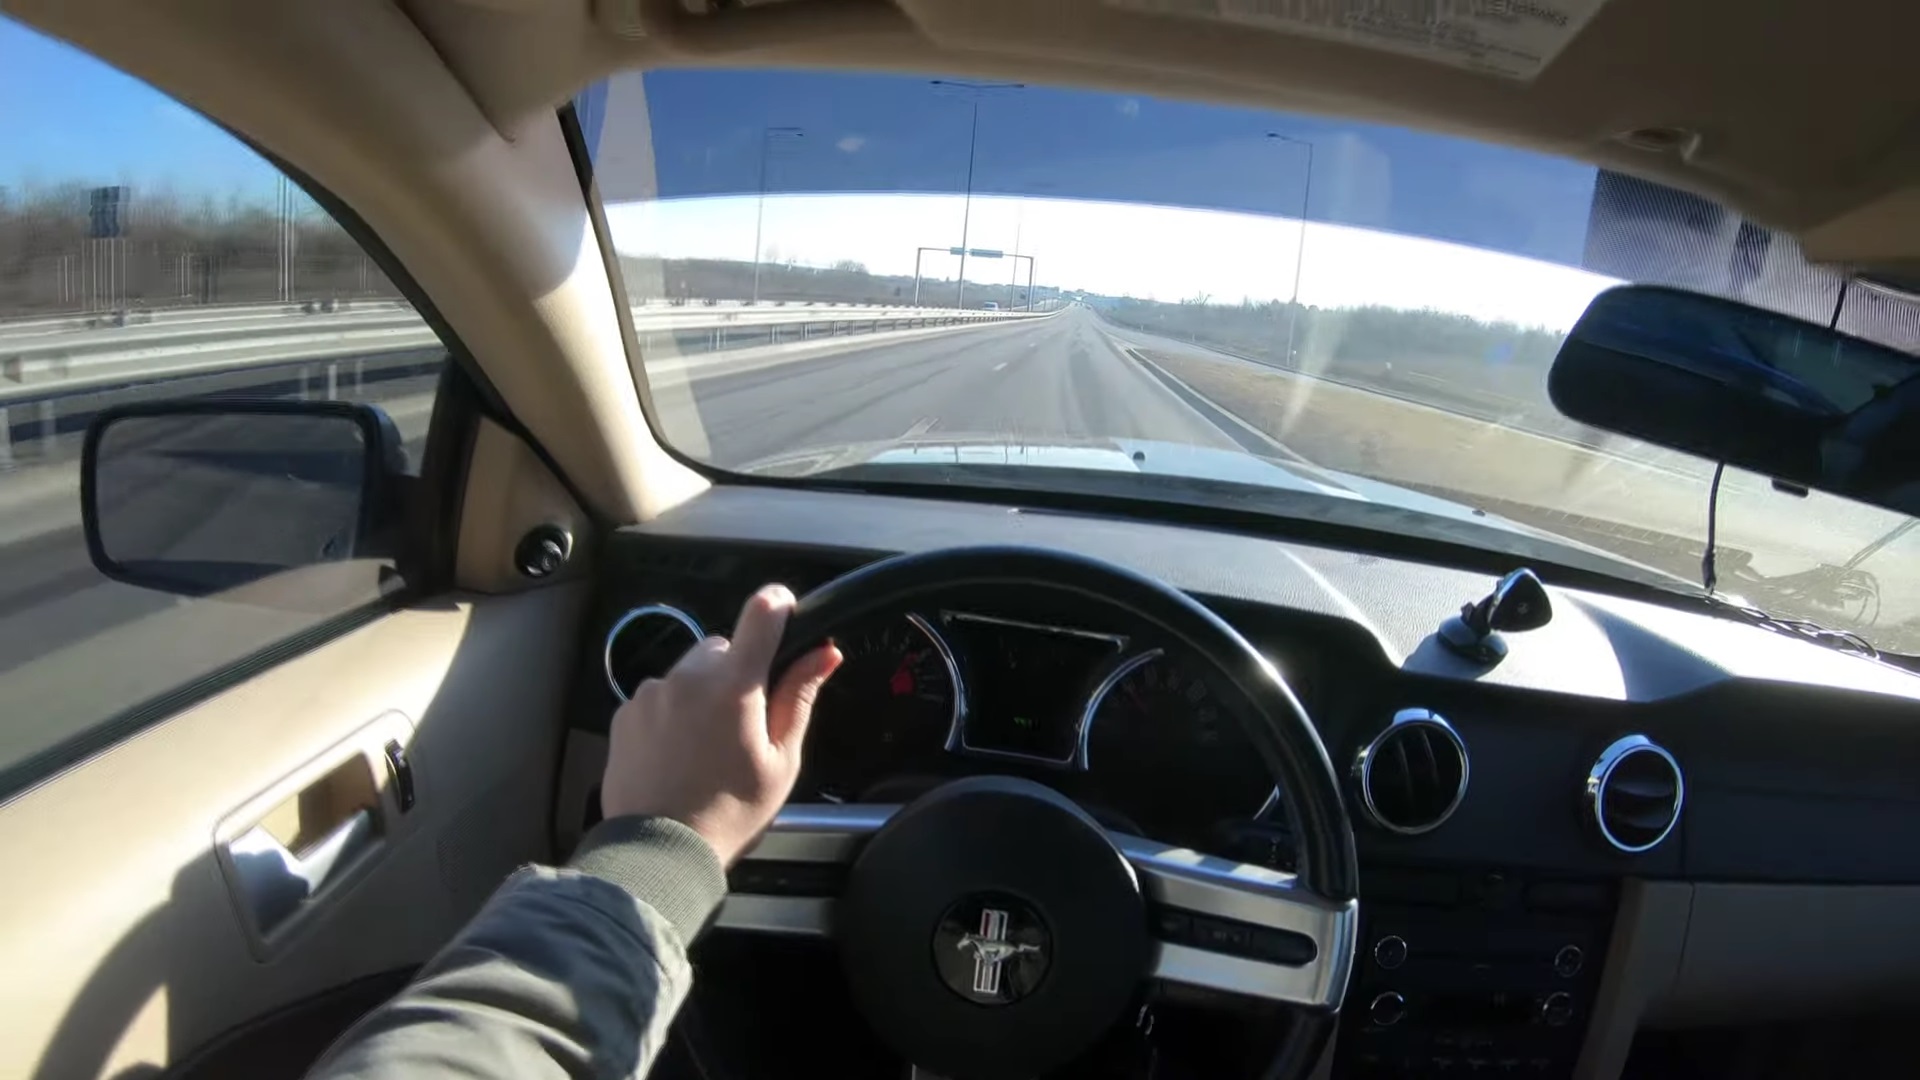 Video: 2008 Ford Mustang GT 4.6L V8 POV Highway Drive